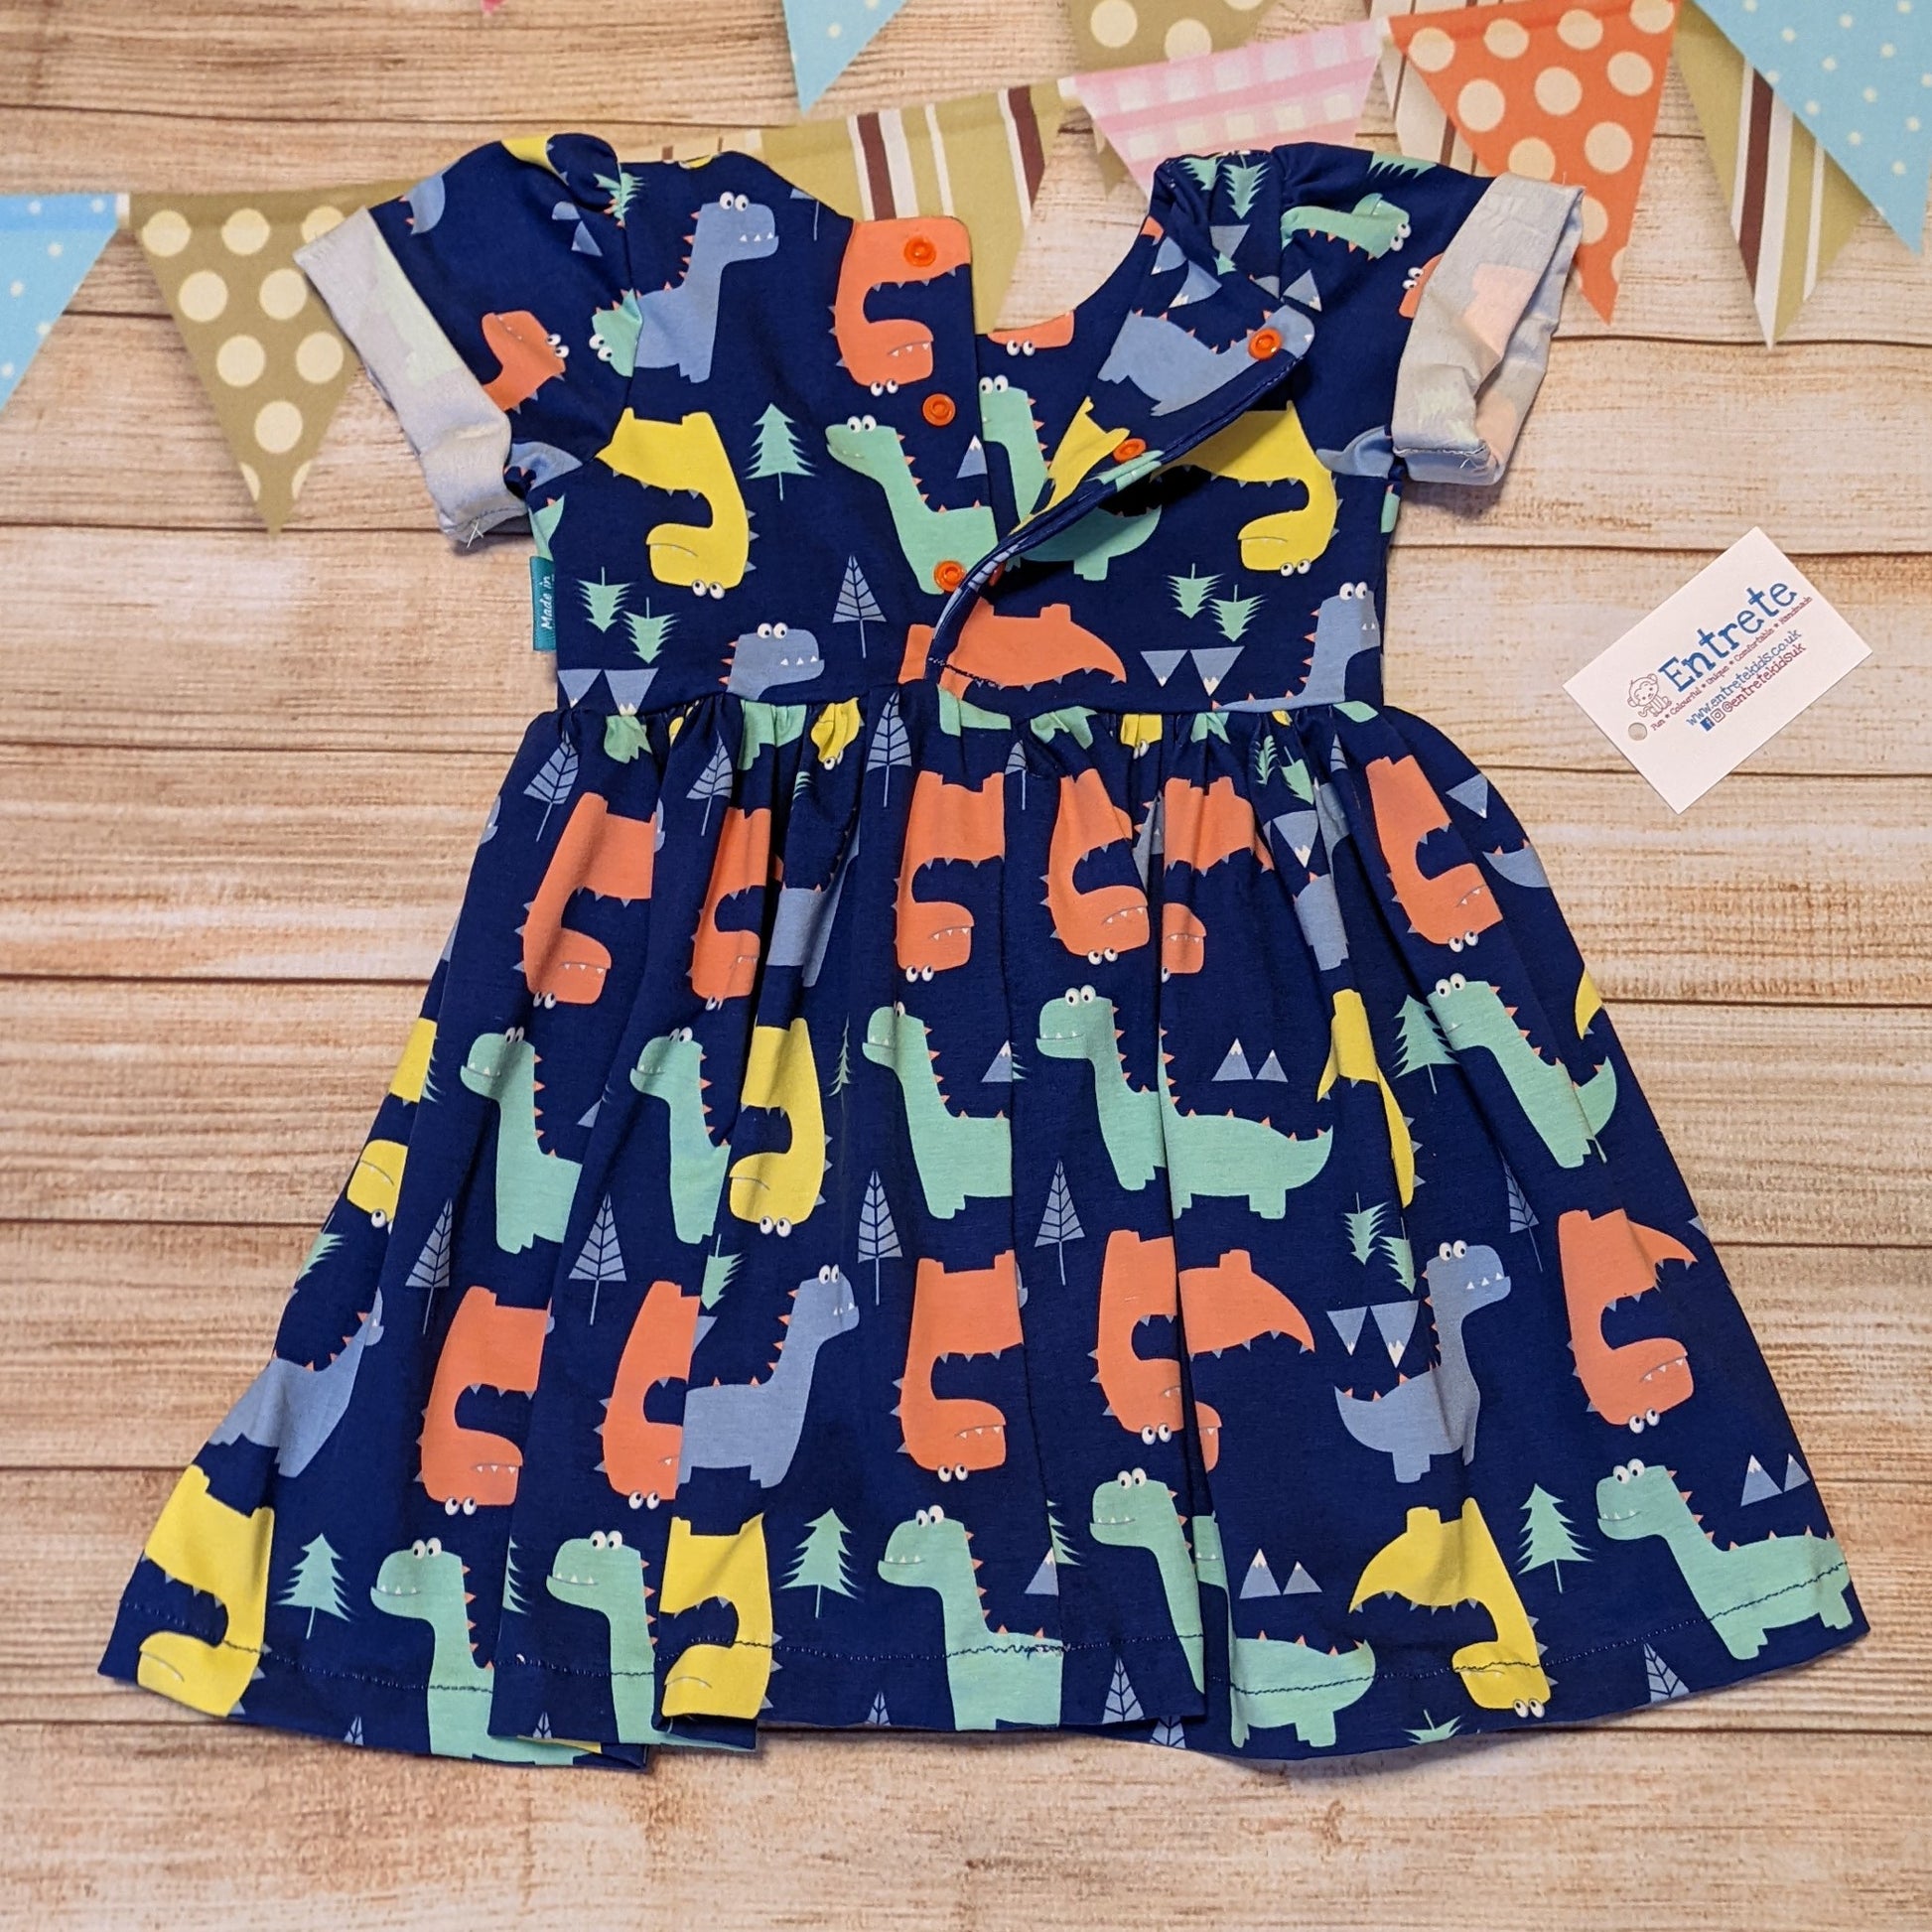 The short sleeved version of the colourful and fun blue dinosaur dress. Handmade using cotton jersey, featuring back poppers and rolled cuffs. Showing the rear popper entry.